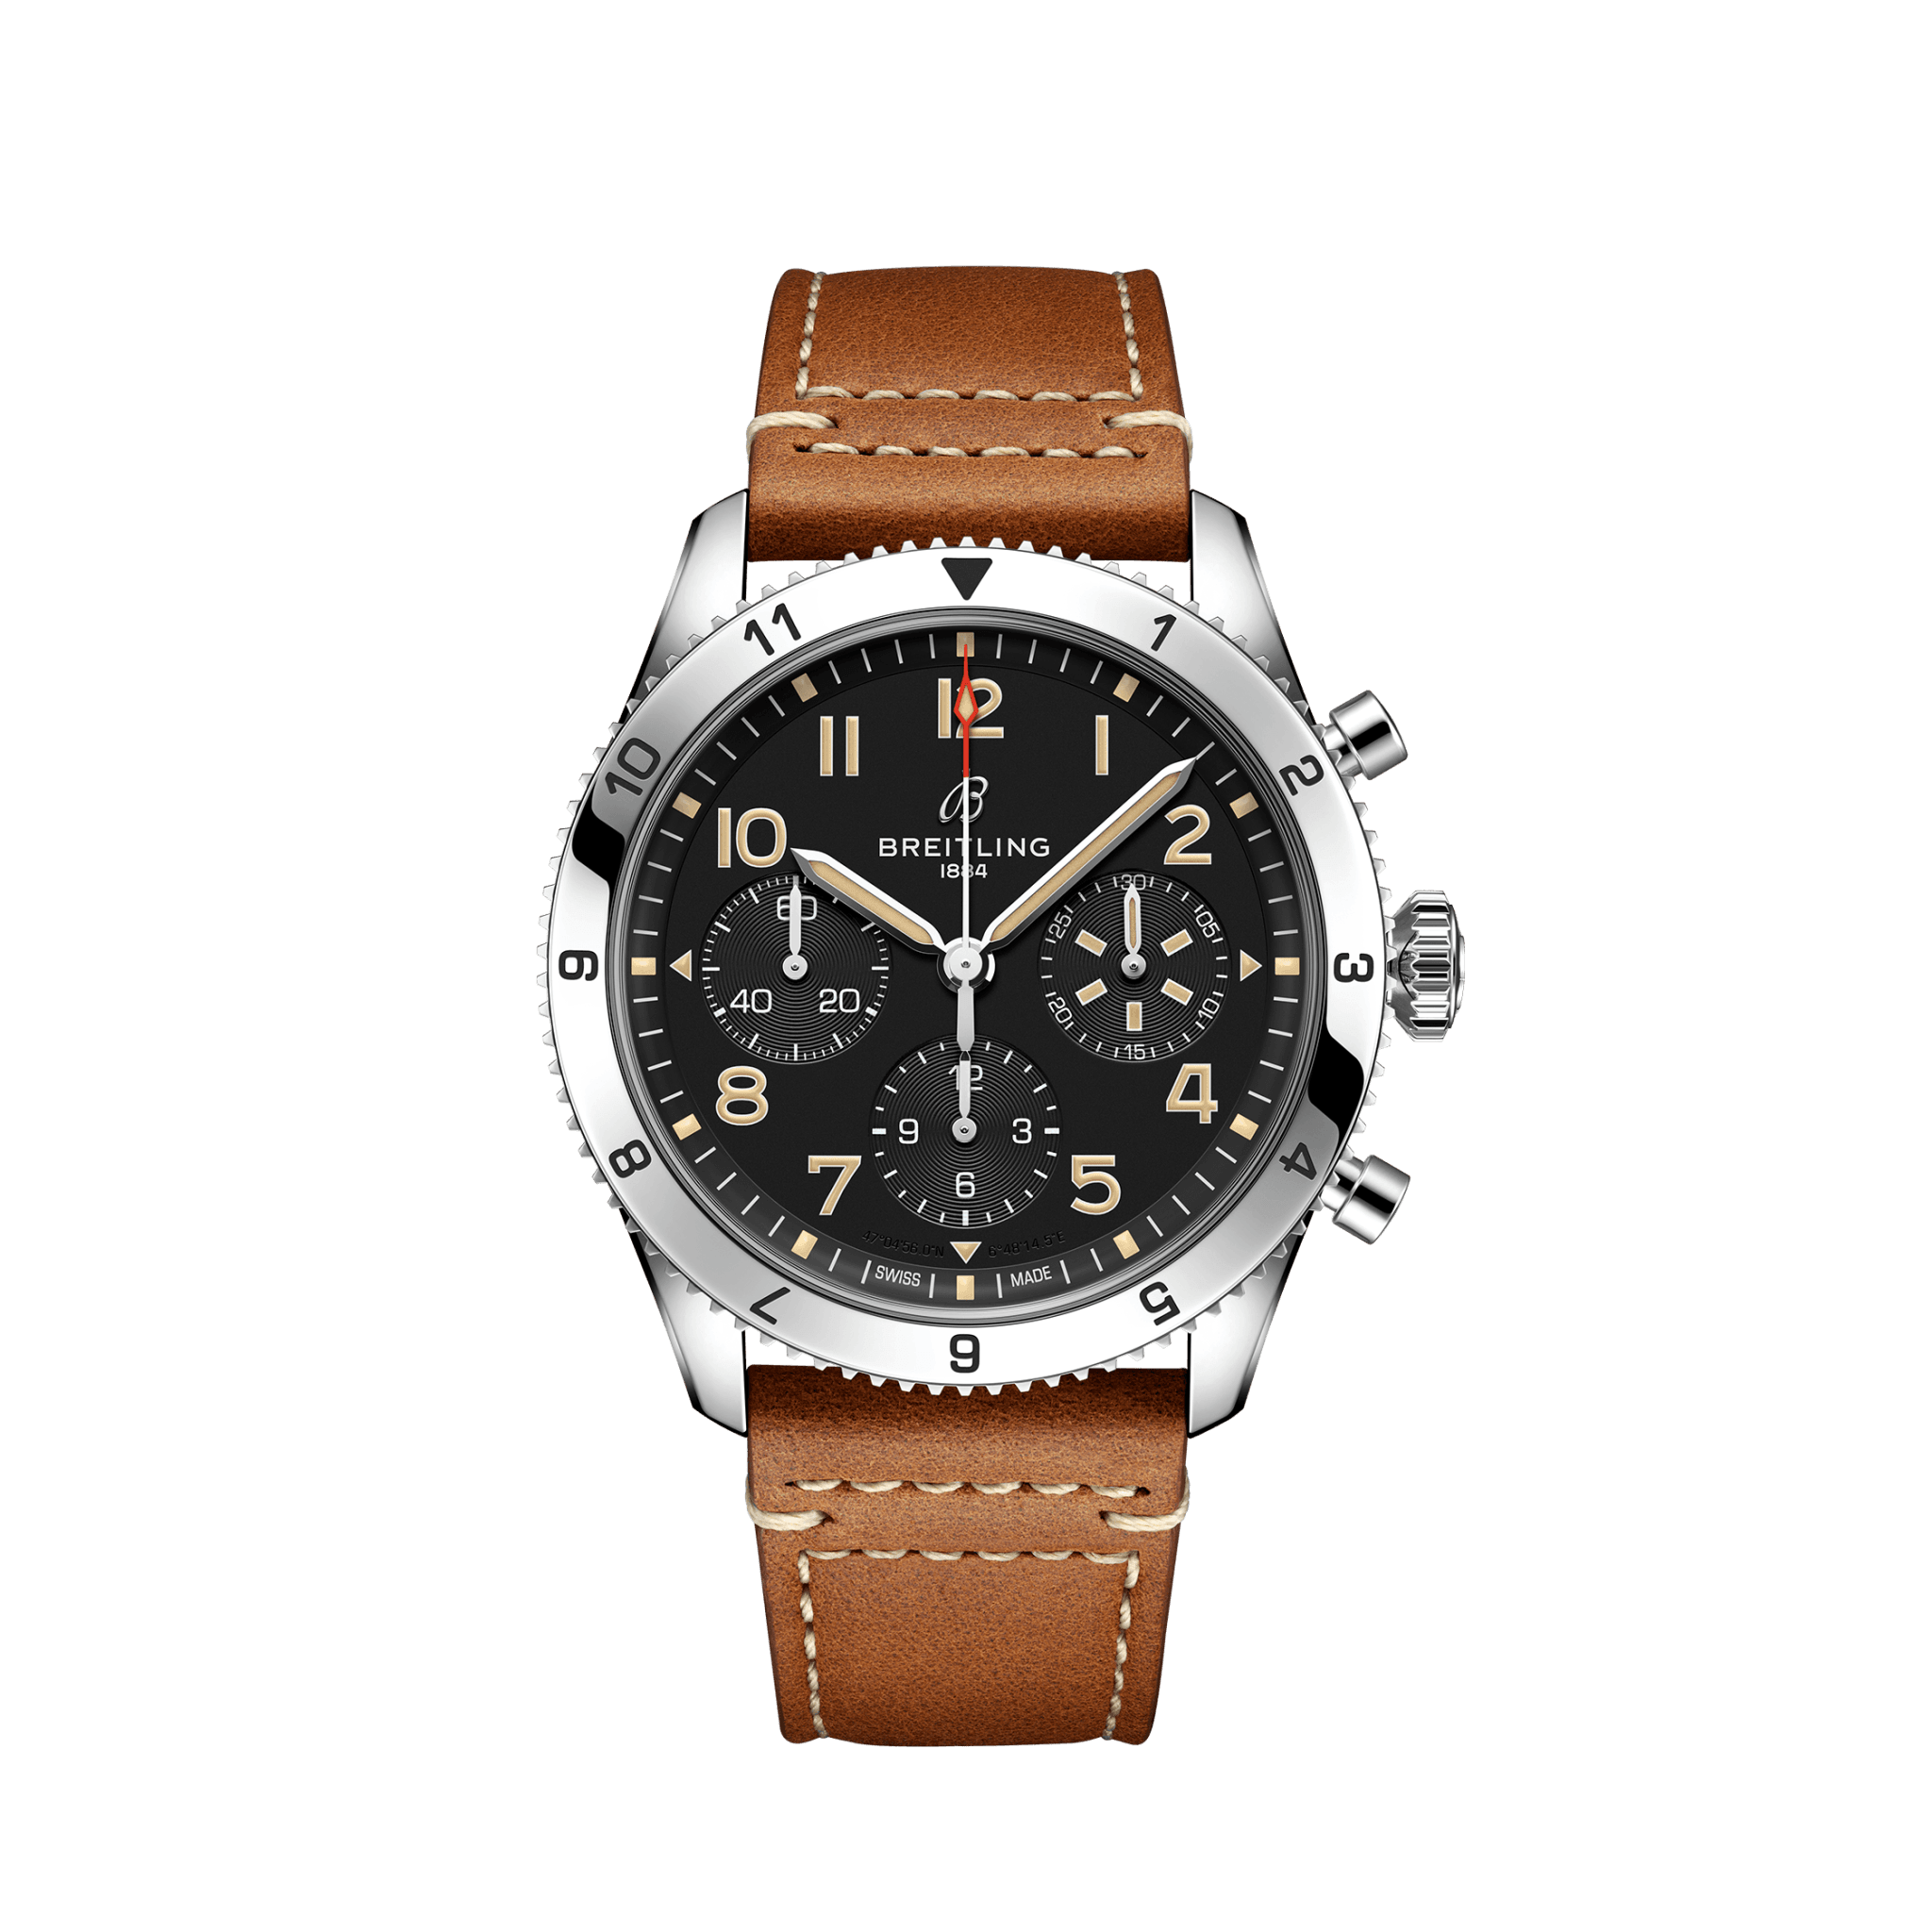 BREITLING Classic AVI , P-51 Mustang Red Gold, R233801A1B1R1 | Breitling,  Chronograph, Red gold